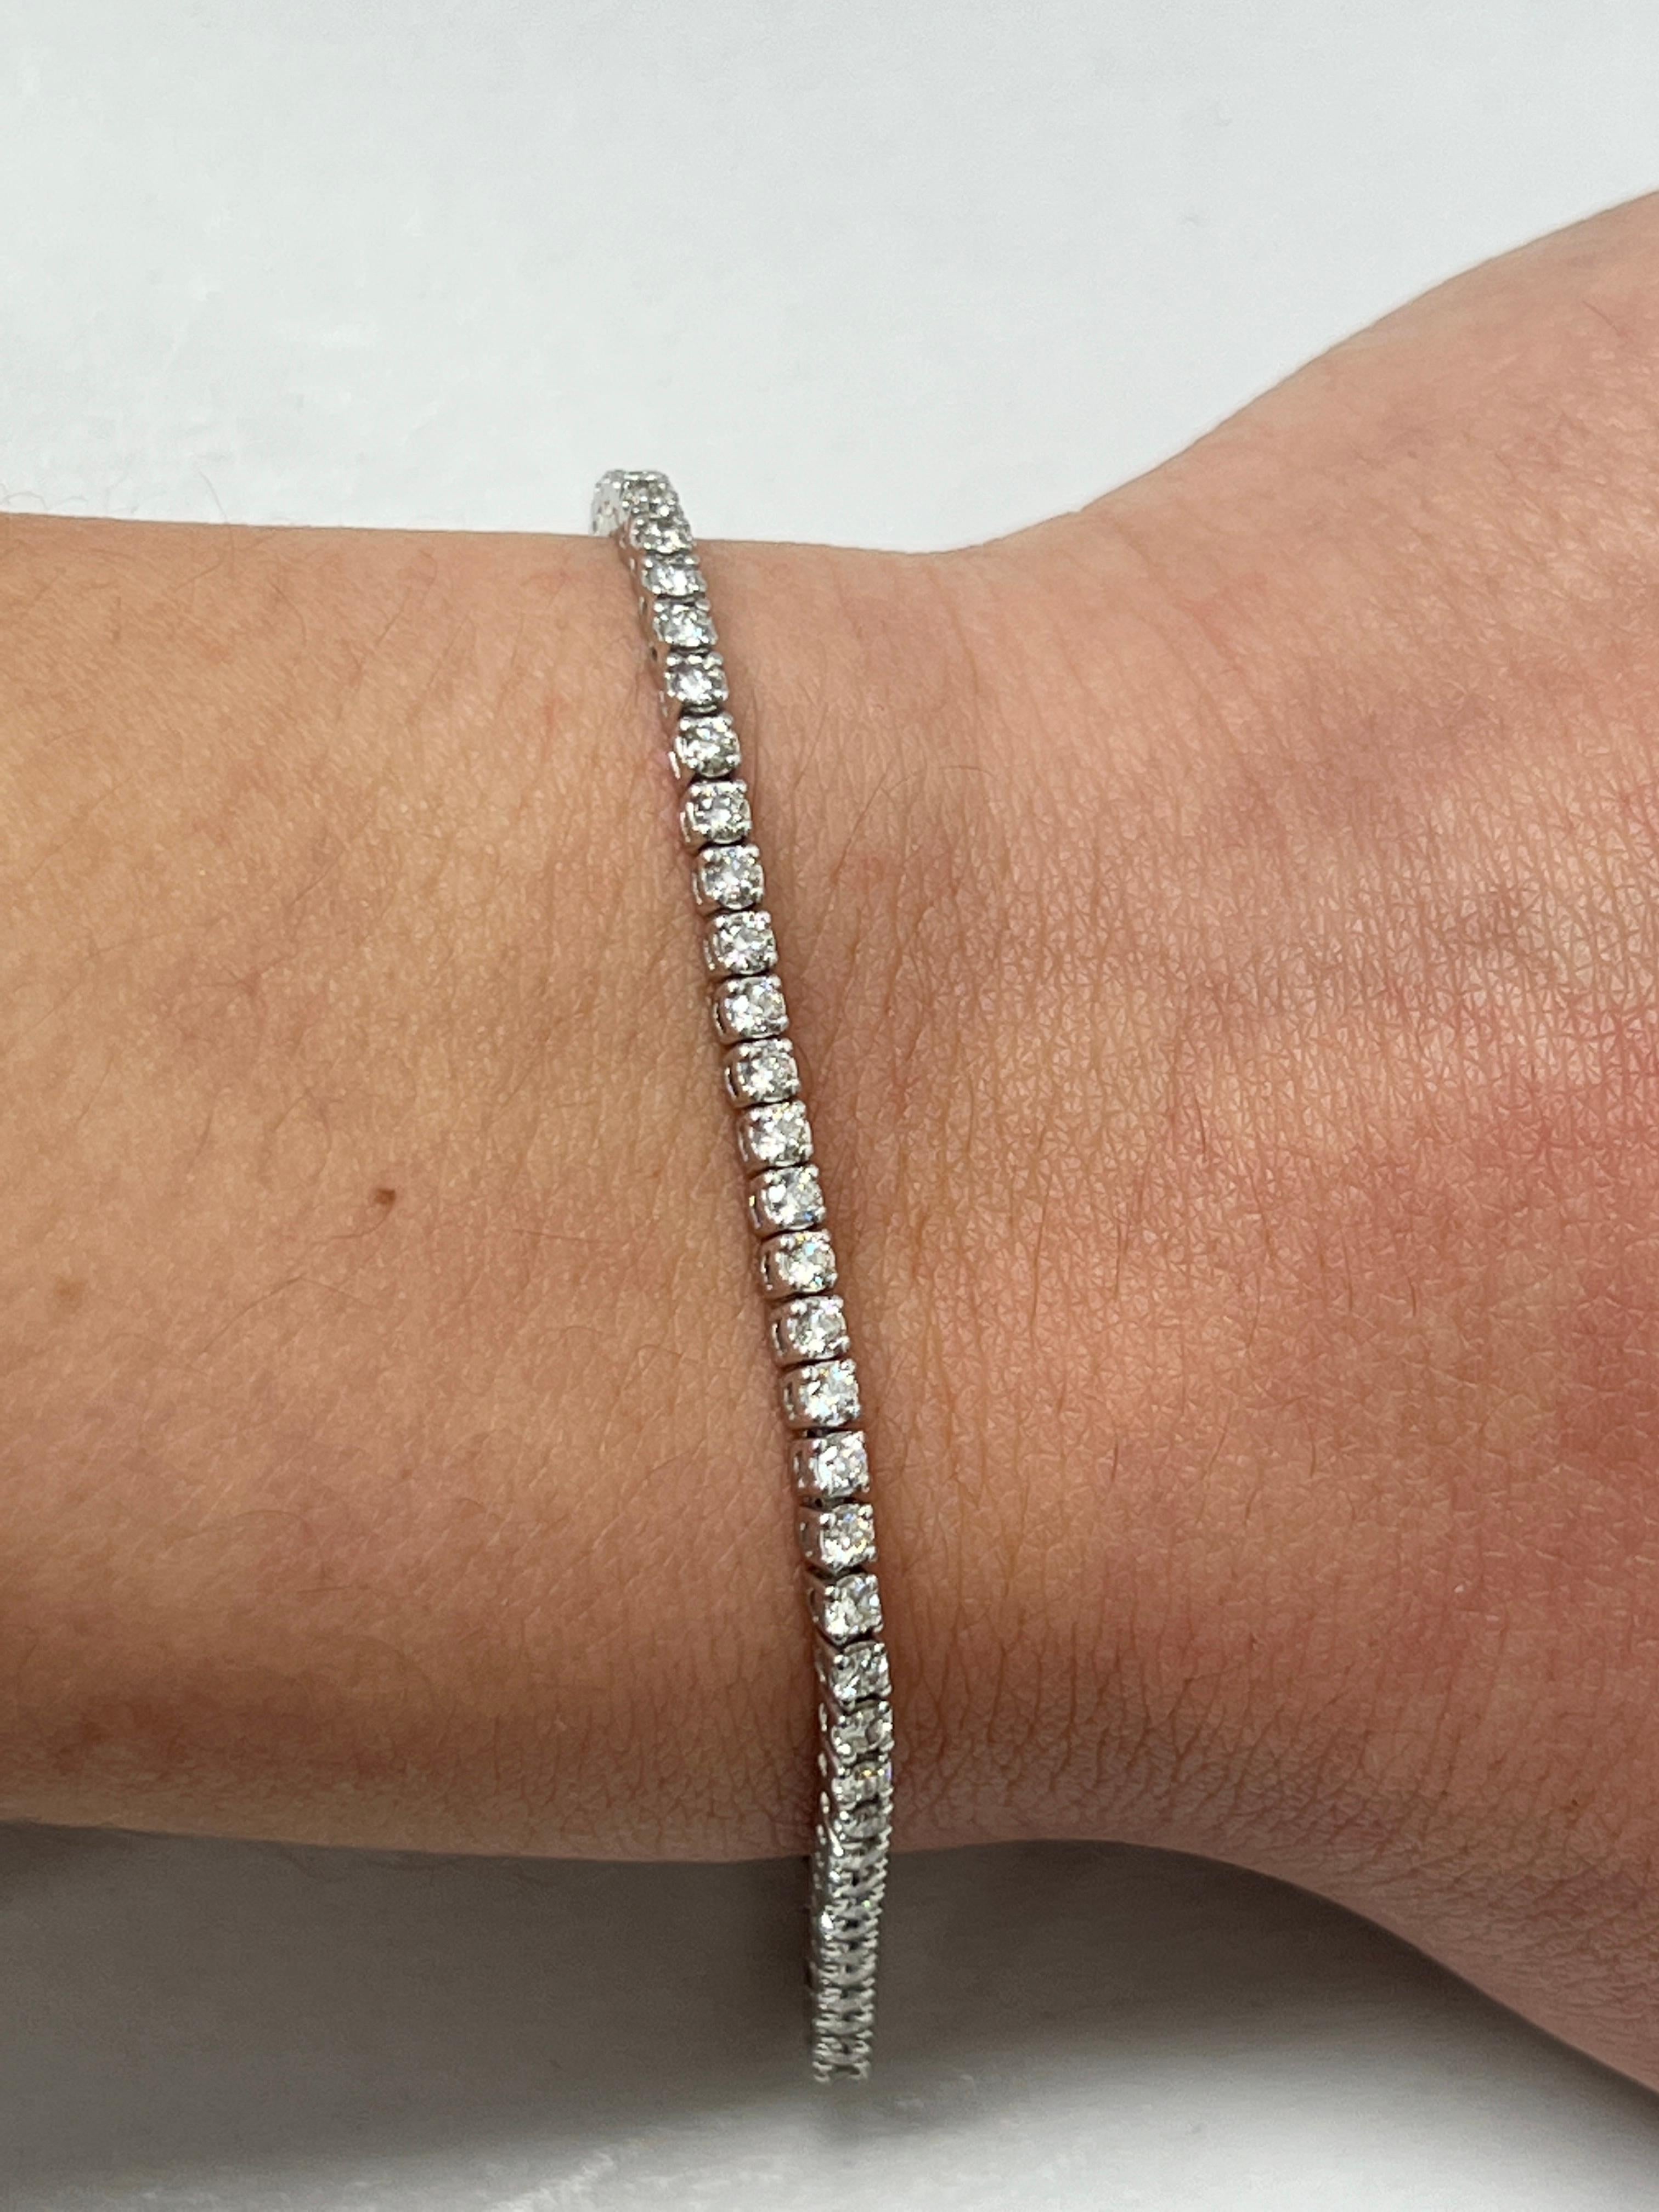 Fashion and glam are at the forefront with this exquisite diamond bracelet. This 14-karat white gold diamond bracelet is made from 10.3 grams of gold. The top is adorned with one row of I-J color, VS/SI clarity diamonds. This bracelet carries 63